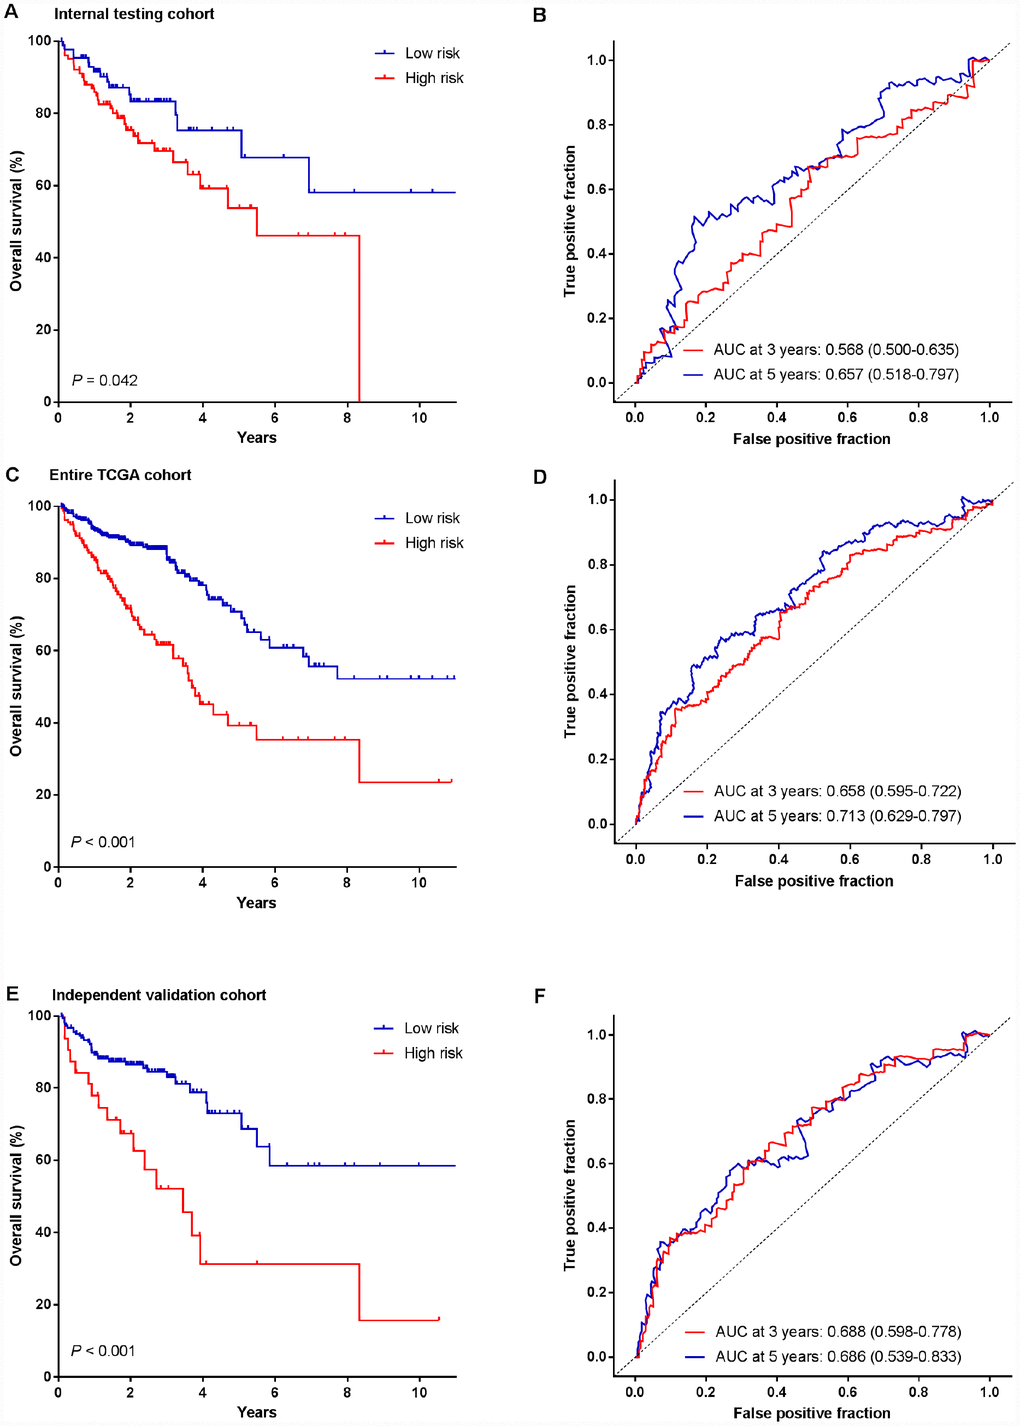 Kaplan-Meier survival analysis and time-dependent ROC curves of the miRNA signature in the testing cohort, entire TCGA cohort and independent validation cohort. (A, B) Internal testing cohort. (C, D) Entire TCGA cohort. (E, F) Independent validation cohort. We used AUCs at 3 and 5 years to assess prognostic accuracy, and calculated P values using the log-rank test.